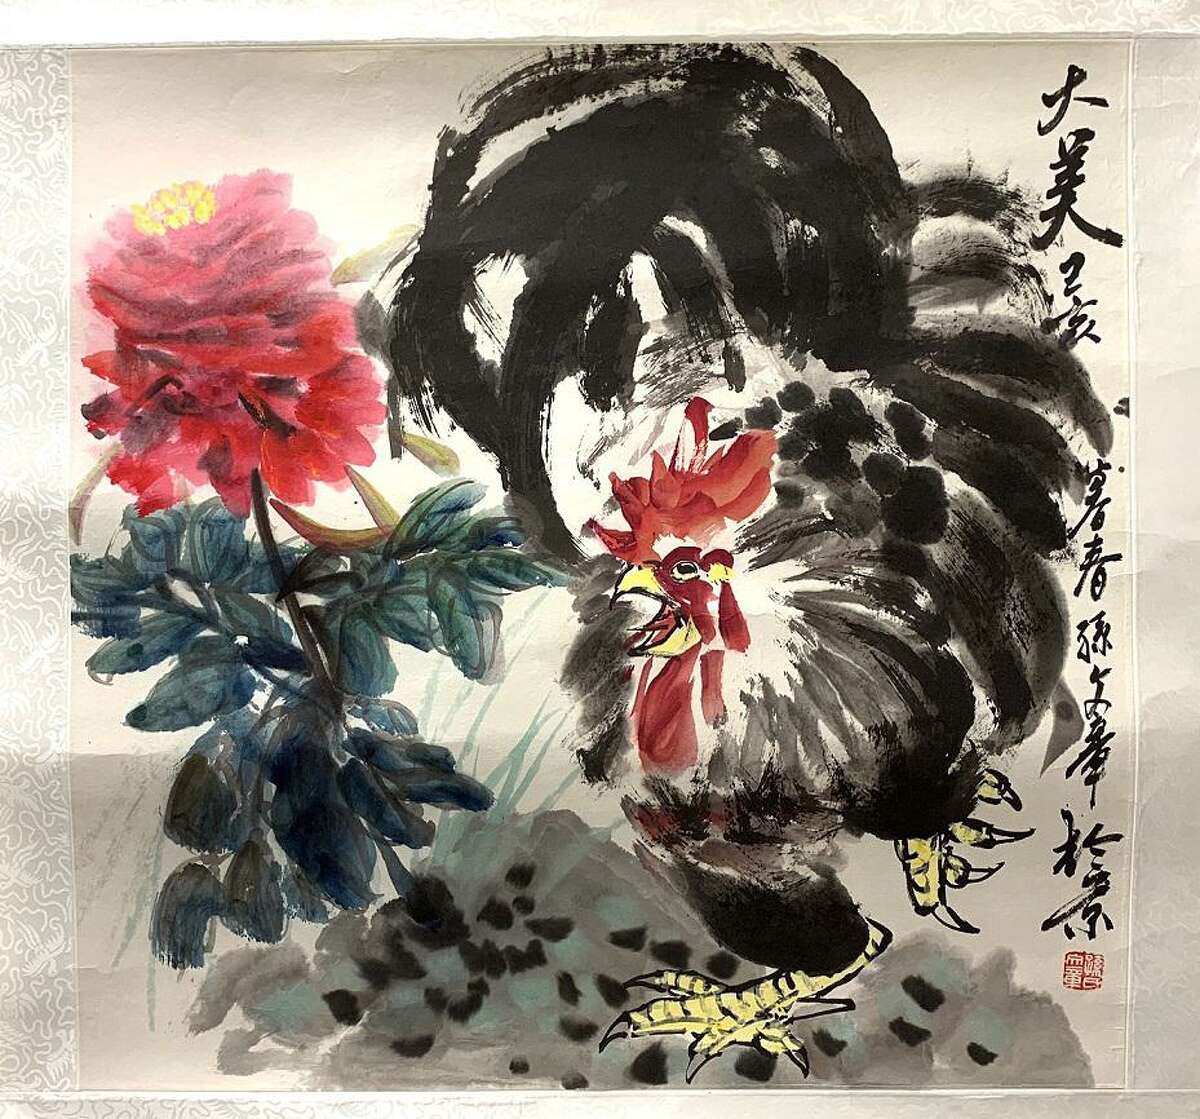 Sun Wenzhang’s “The End of Spring 1” is featured in “Contemporary Artists/Traditional Forms: Chinese Brushwork.”